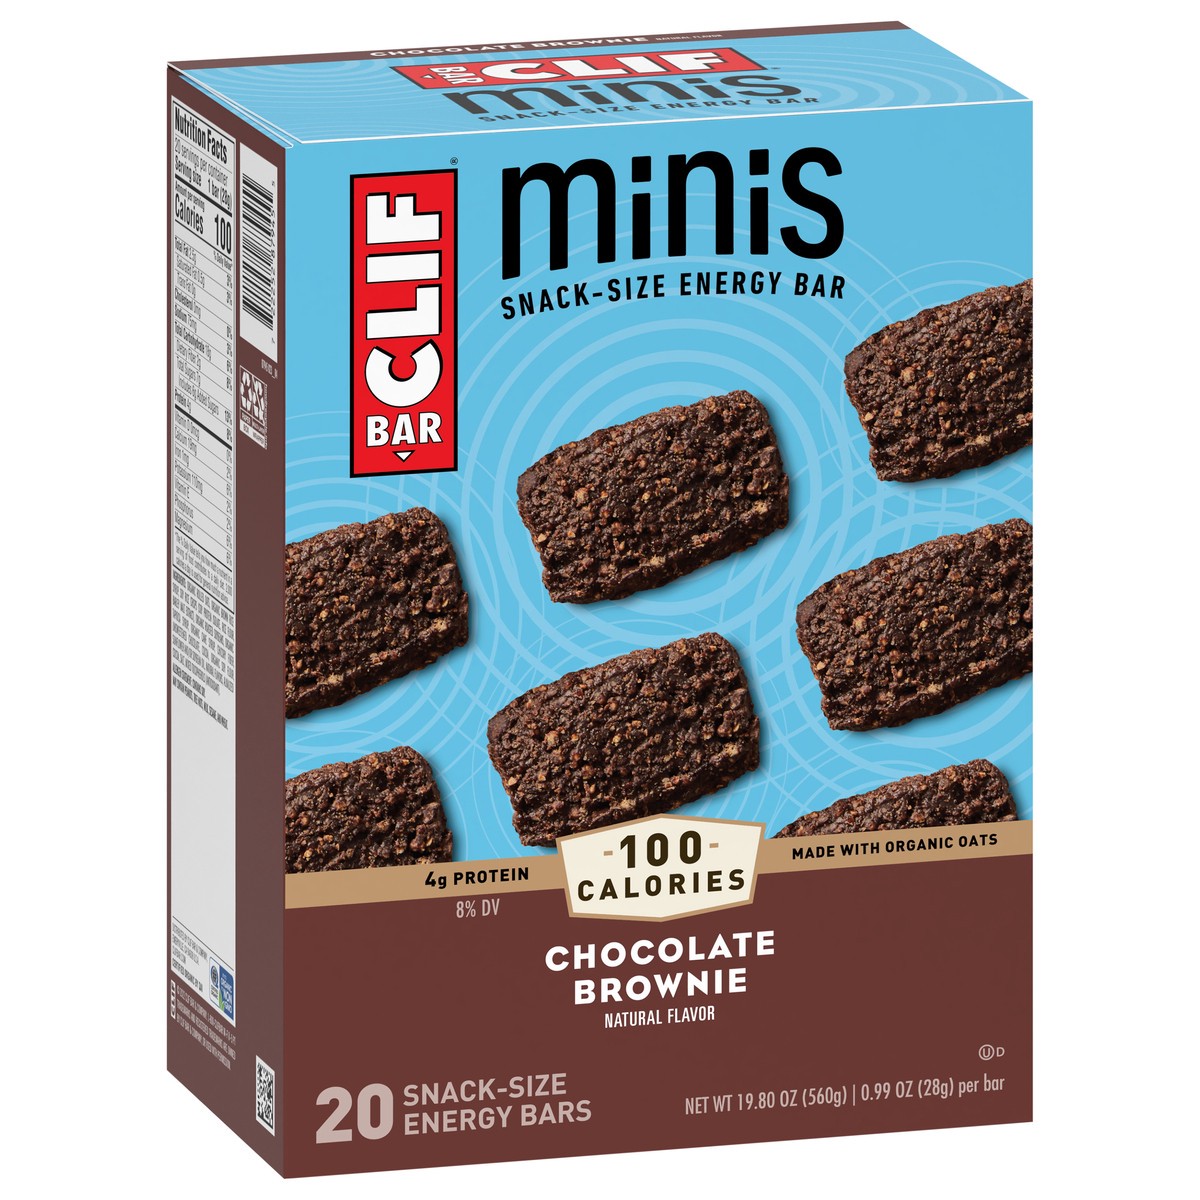 slide 2 of 9, CLIF BAR Minis - Chocolate Brownie Flavor - Made with Organic Oats - 4g Protein - Non-GMO - Plant Based - Snack-Size Energy Bars - 0.99 oz. (20 Pack), 20 ct